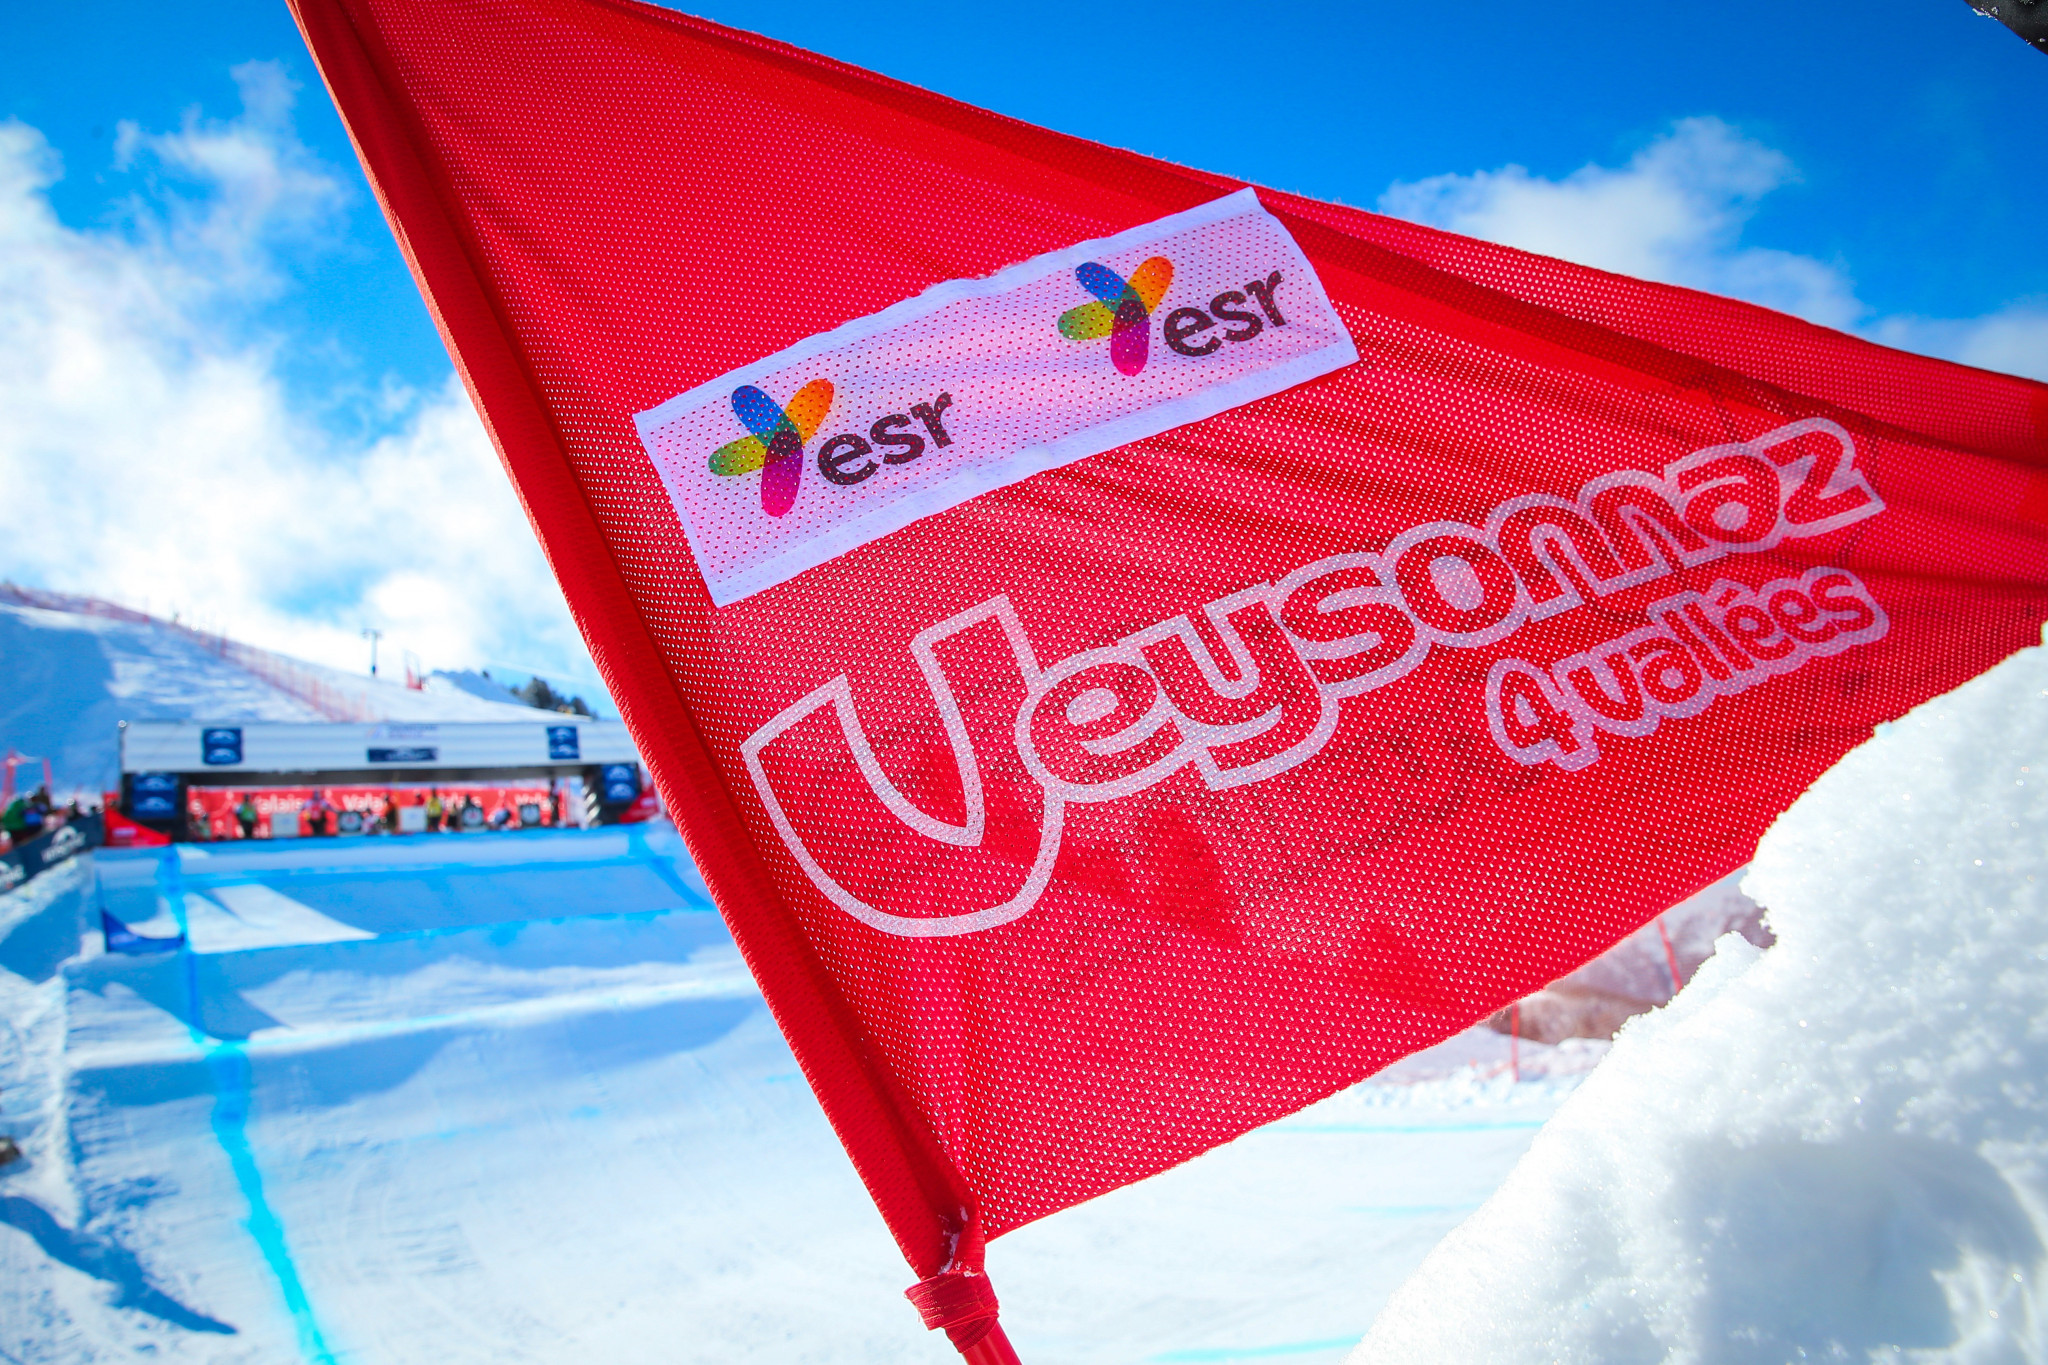 Veysonnaz ready to stage season's final Ski and Snowboard Cross World Cup events